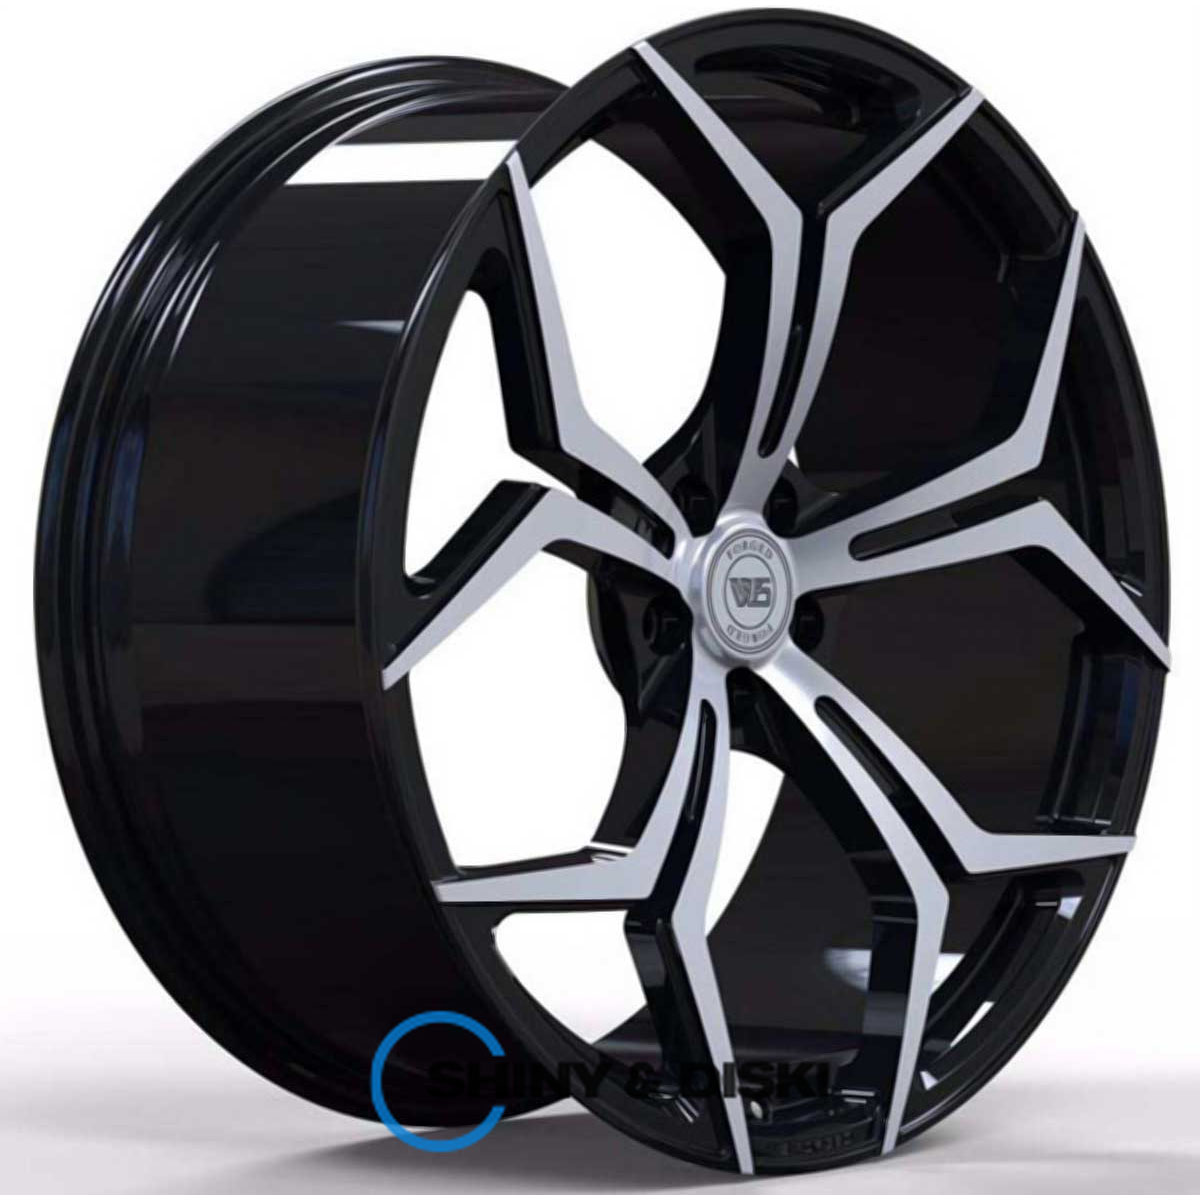 ws forged ws428b gloss black with machined face r22 w10.5 pcd5x112 et43 dia66.5